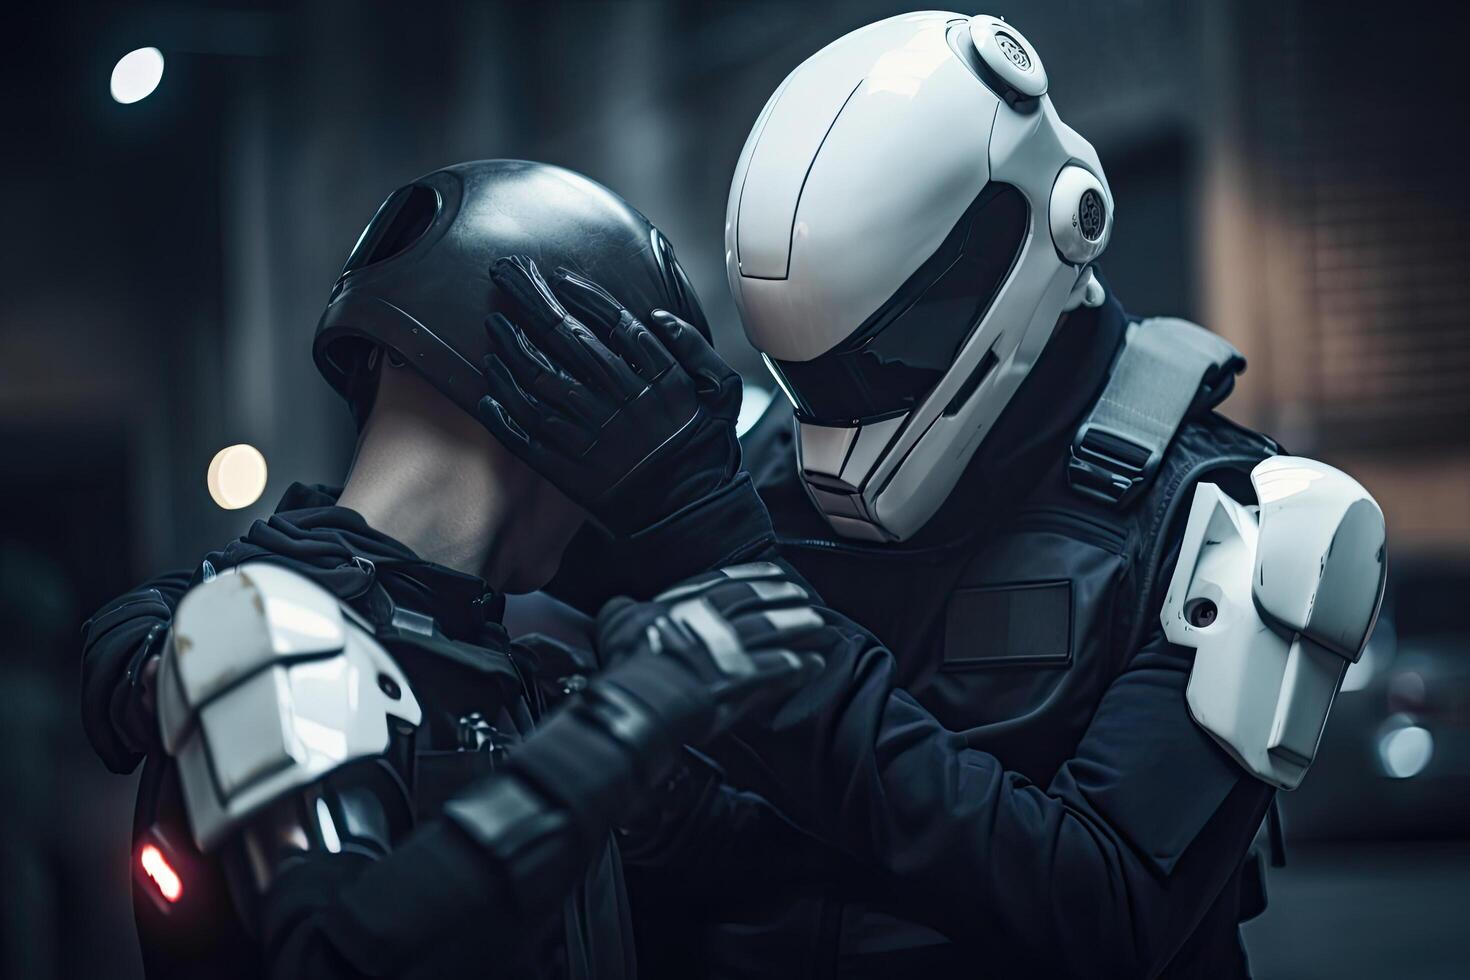 Two cyborgs are fighting in a dark room. They are wearing helmets. Futuristic Robot police catching and arresting, photo